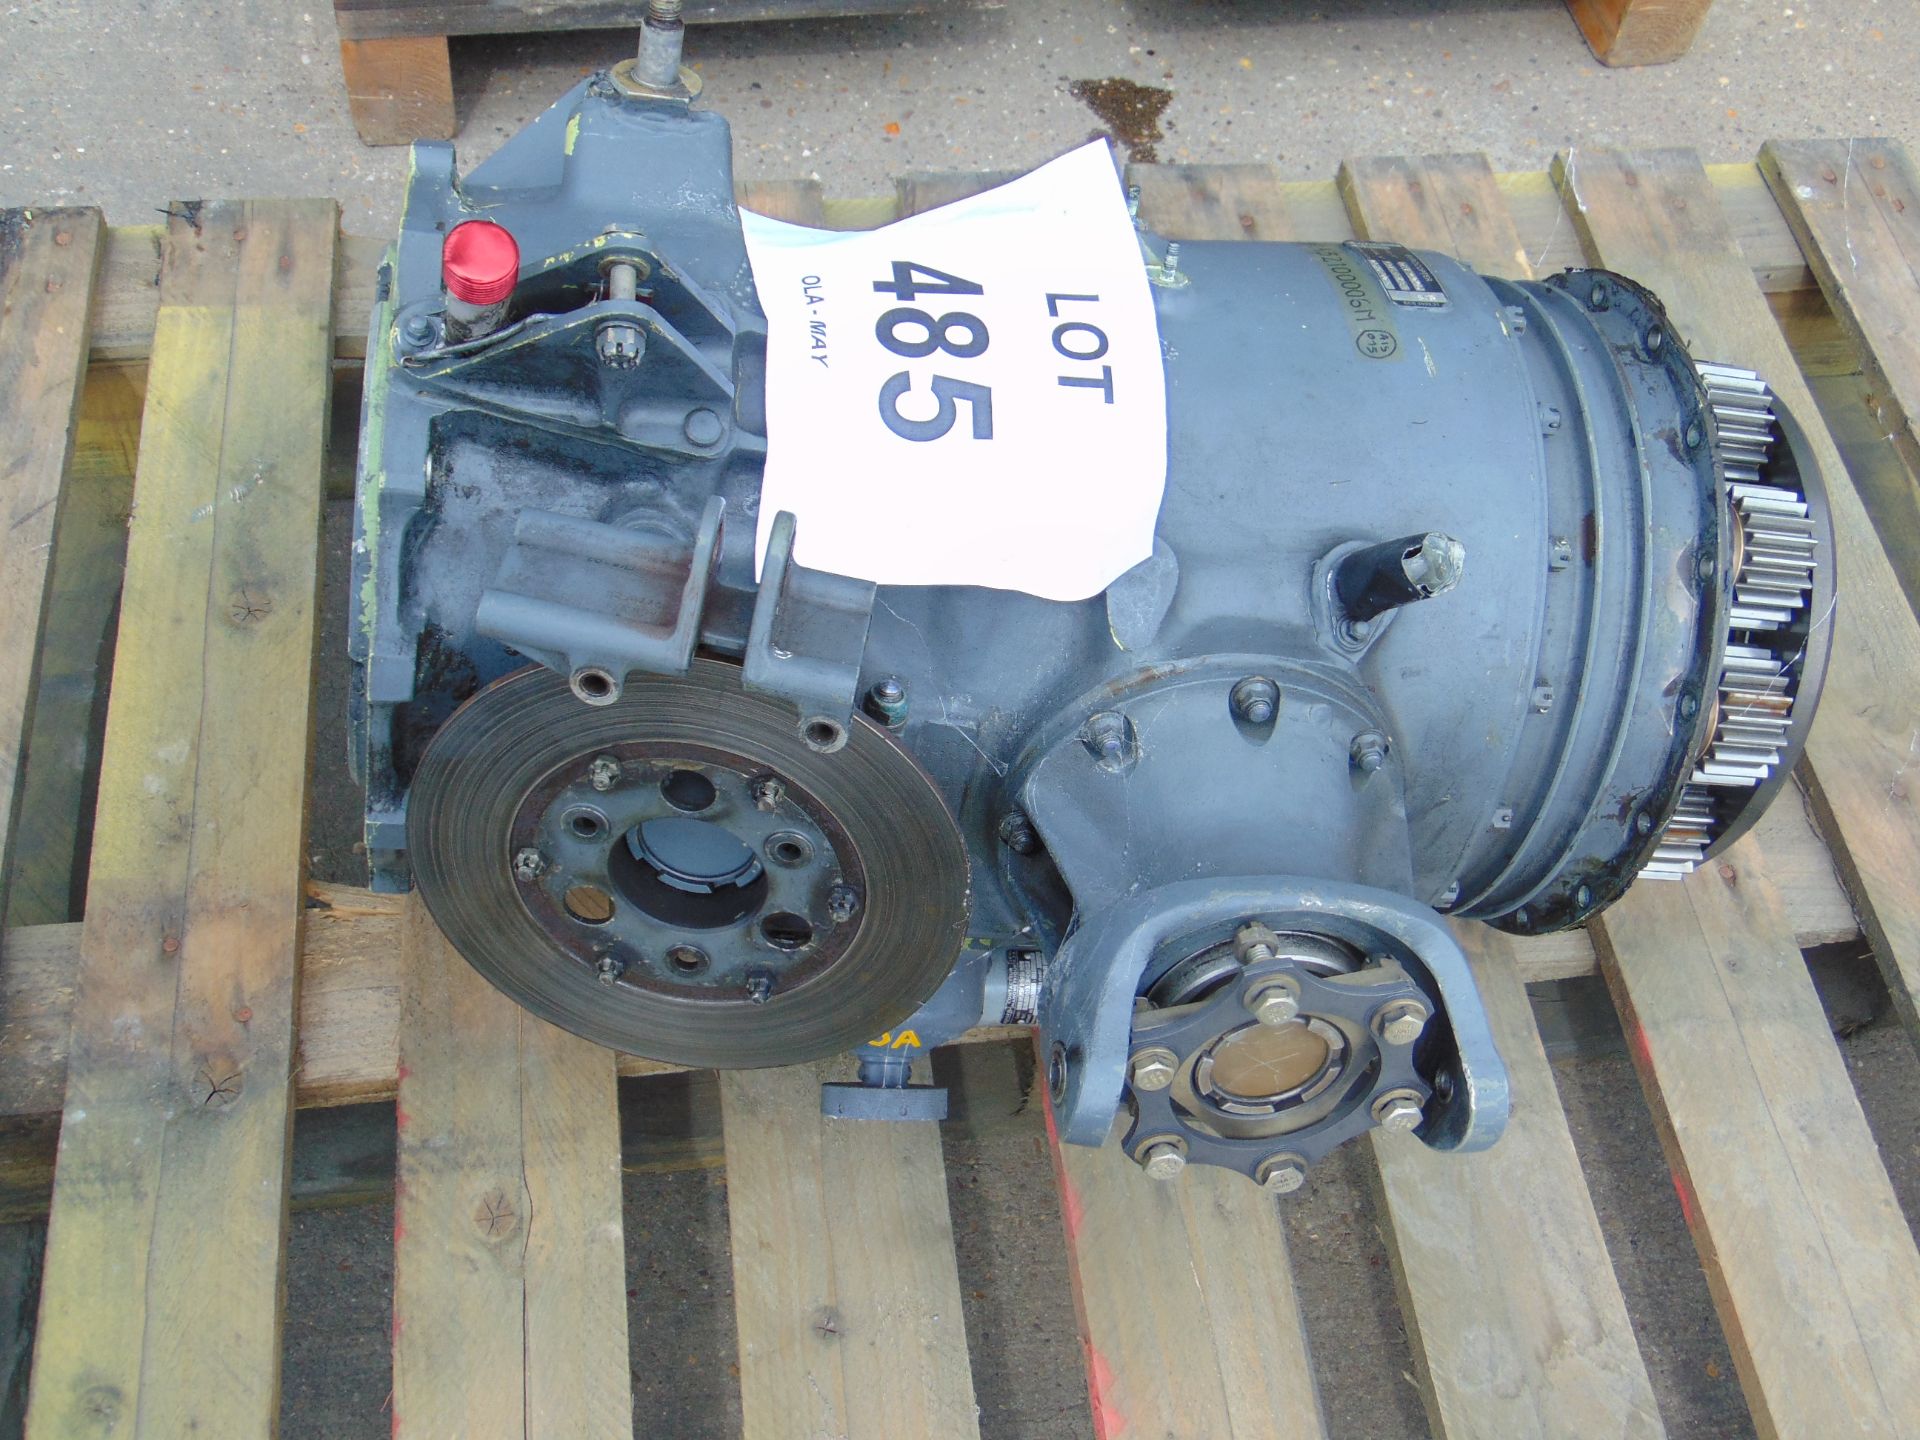 GAZELLE MAIN ROTOR GEARBOX ASSEMBLY - Image 4 of 6